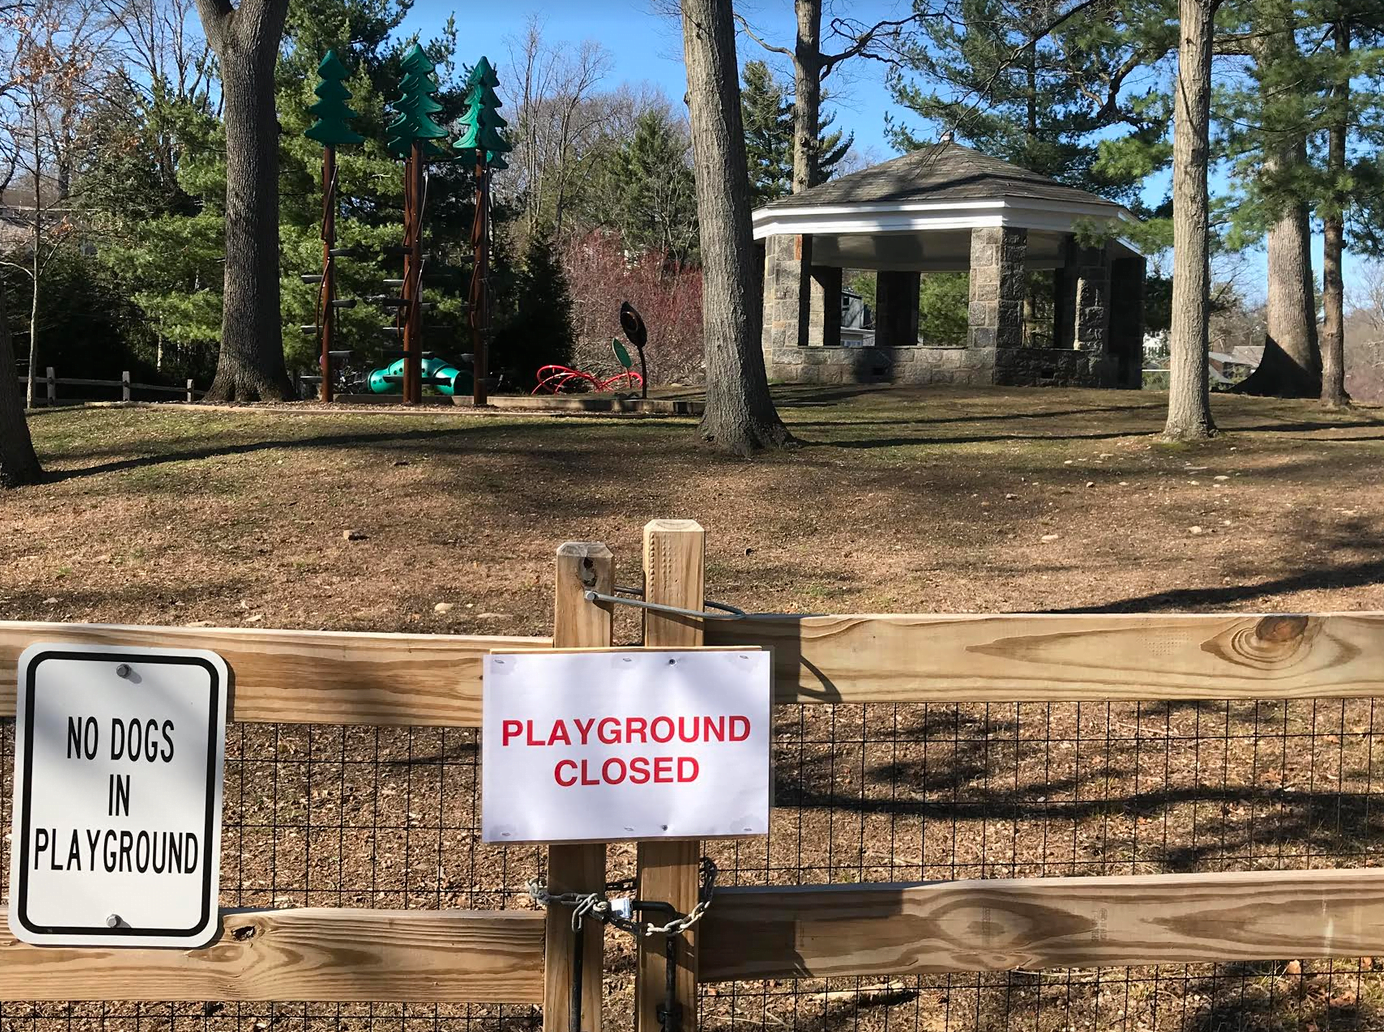 Nobody in the closed playground at Binney Park. March 21, 2020 Photo: Leslie Yager